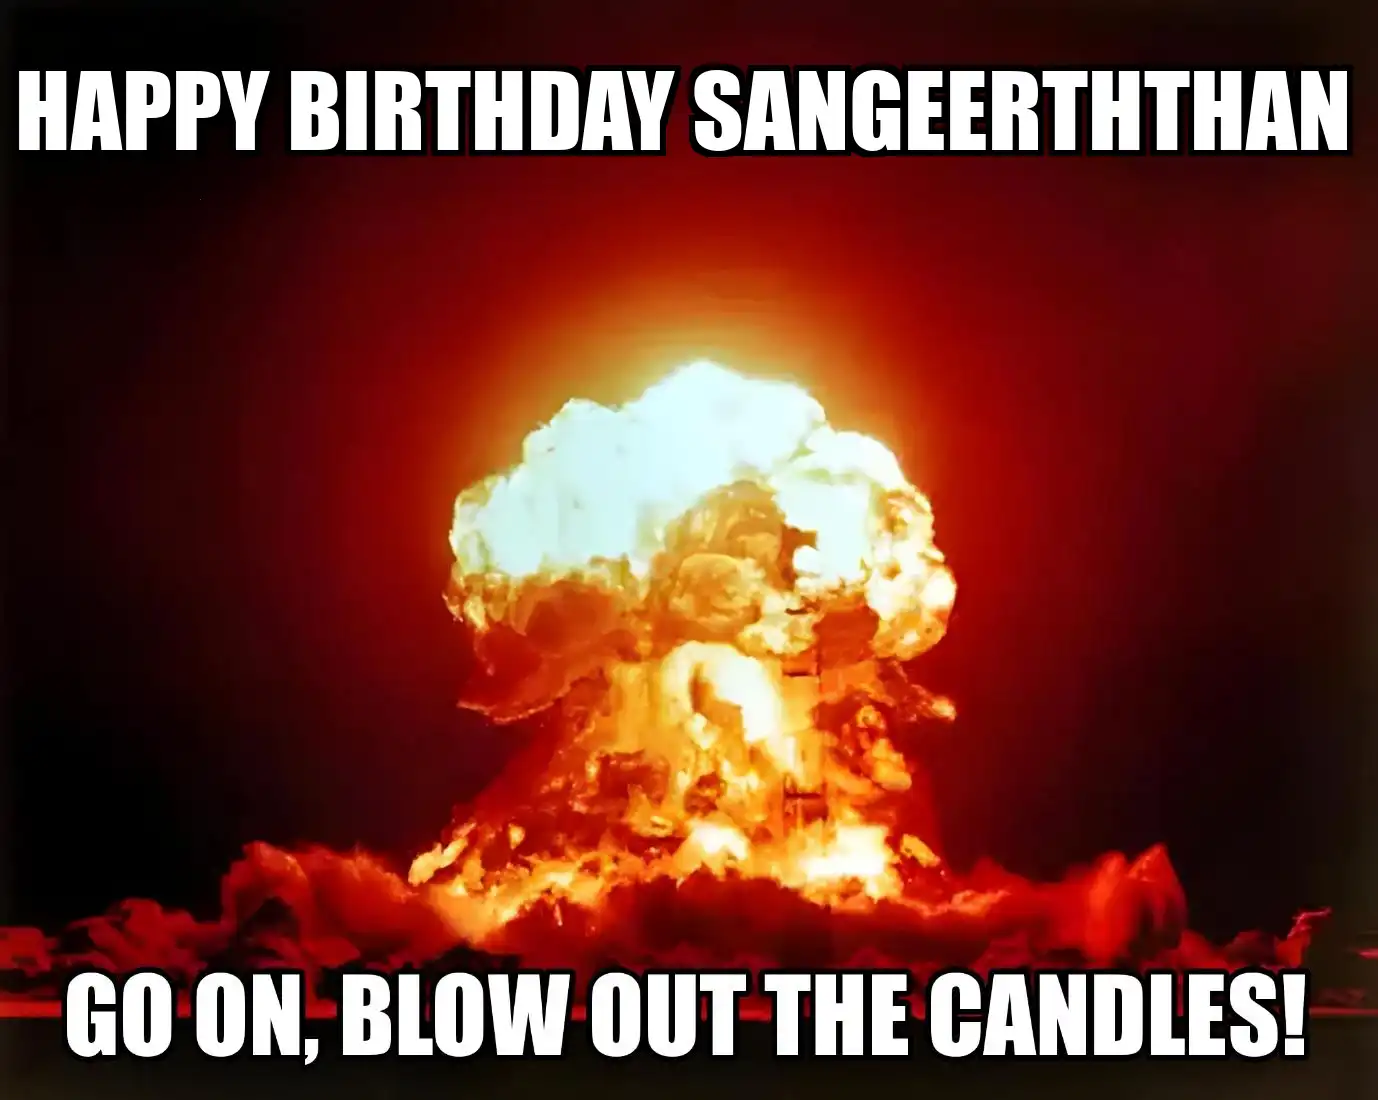 Happy Birthday Sangeerththan Go On Blow Out The Candles Meme